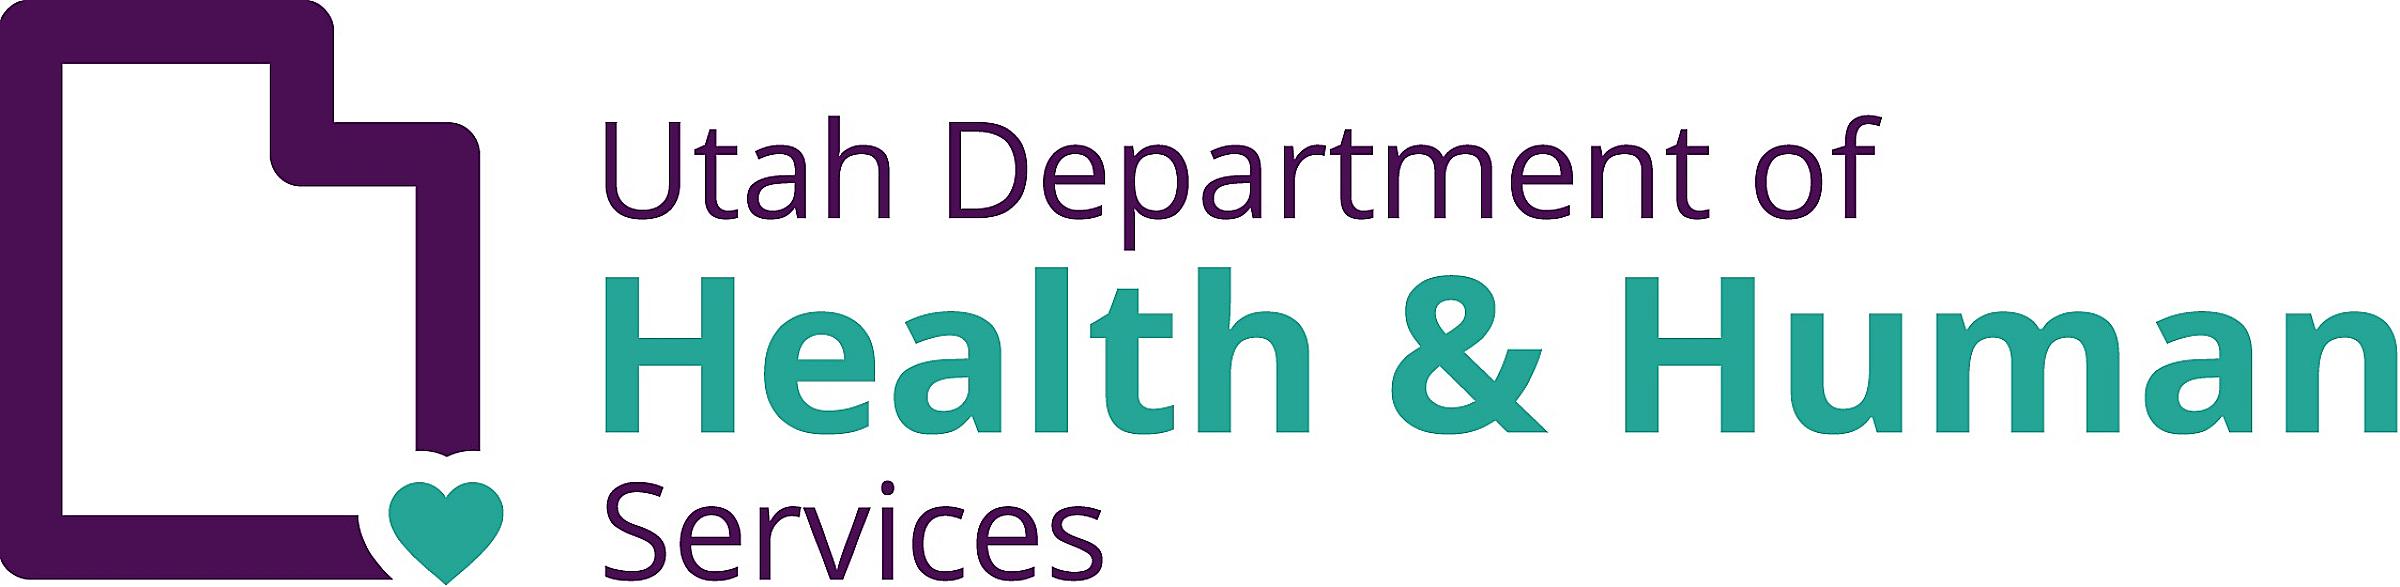 Picture of Utah Department of Health & Human Services logo with navy blue outline of Utah state